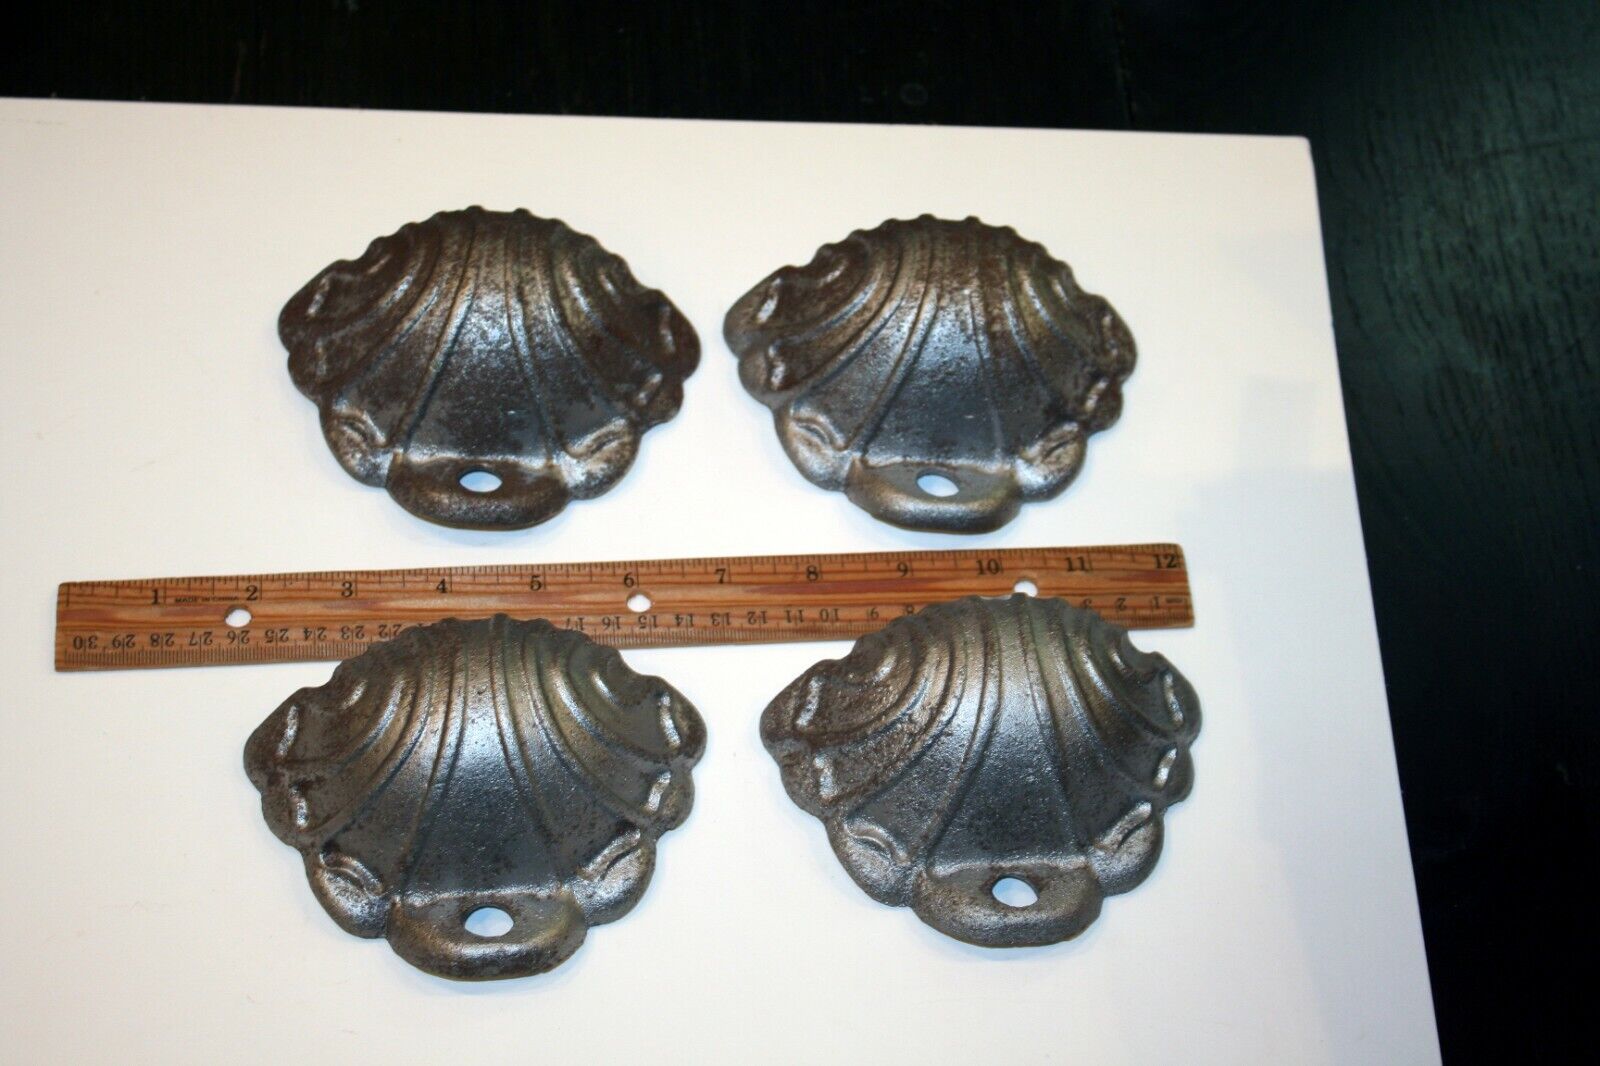 Matched Set of 4 Antique Cast Iron Corner Covers Parlor Stove Parts. Very Nice!! Unbranded - фотография #4